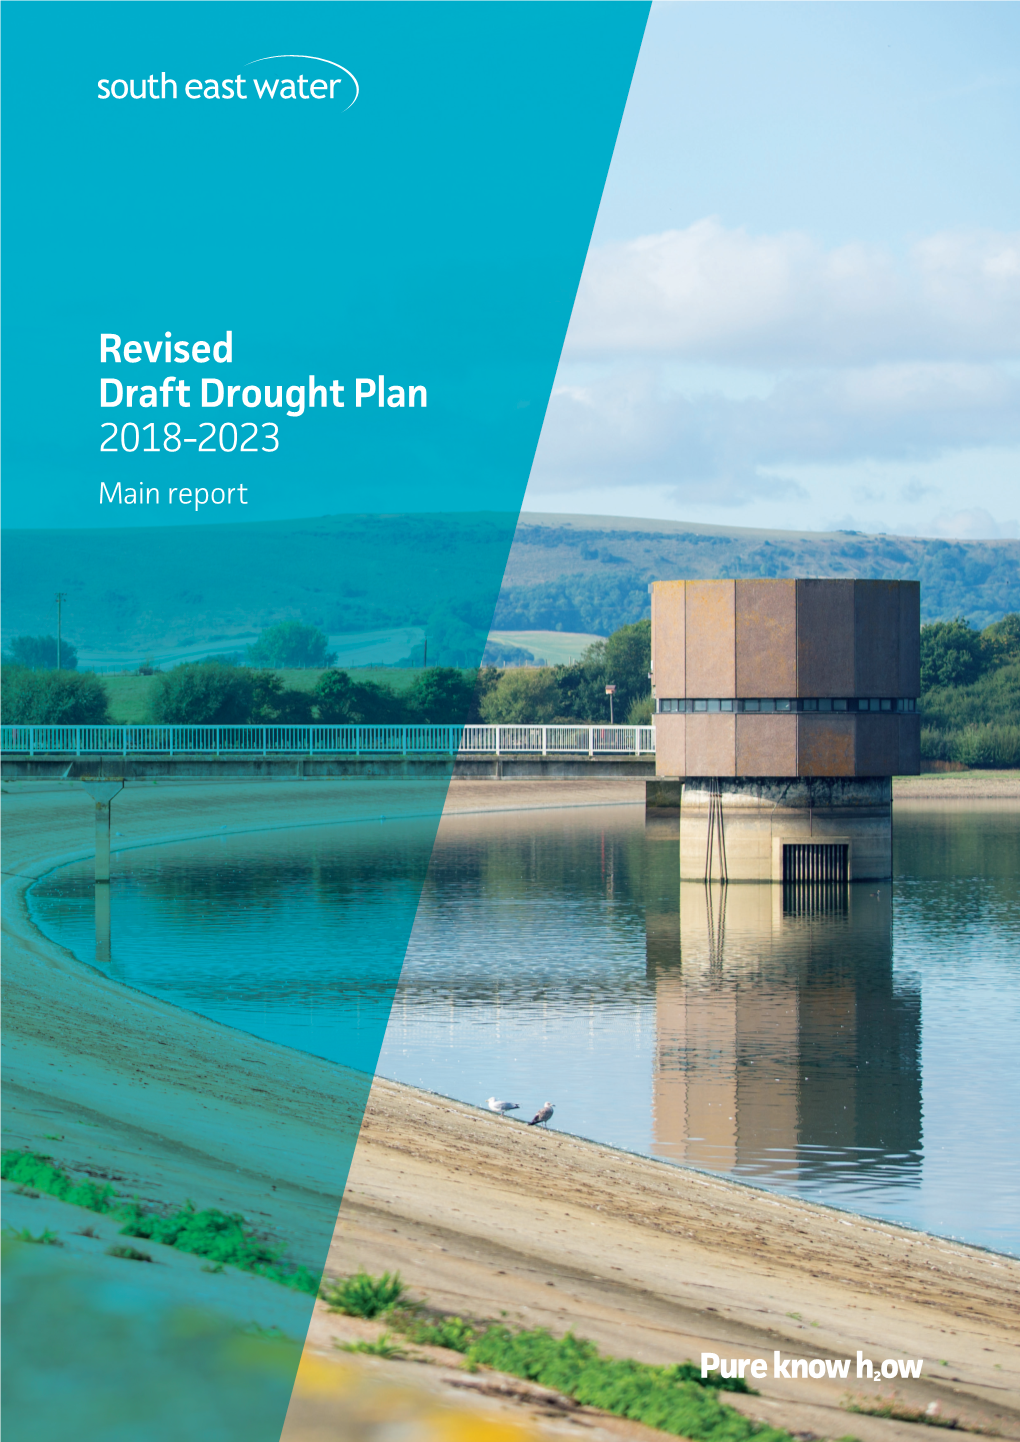 Revised Draft Drought Plan 2017 Has Been Published Following Public Consultation on the Draft Drought Plan 2017